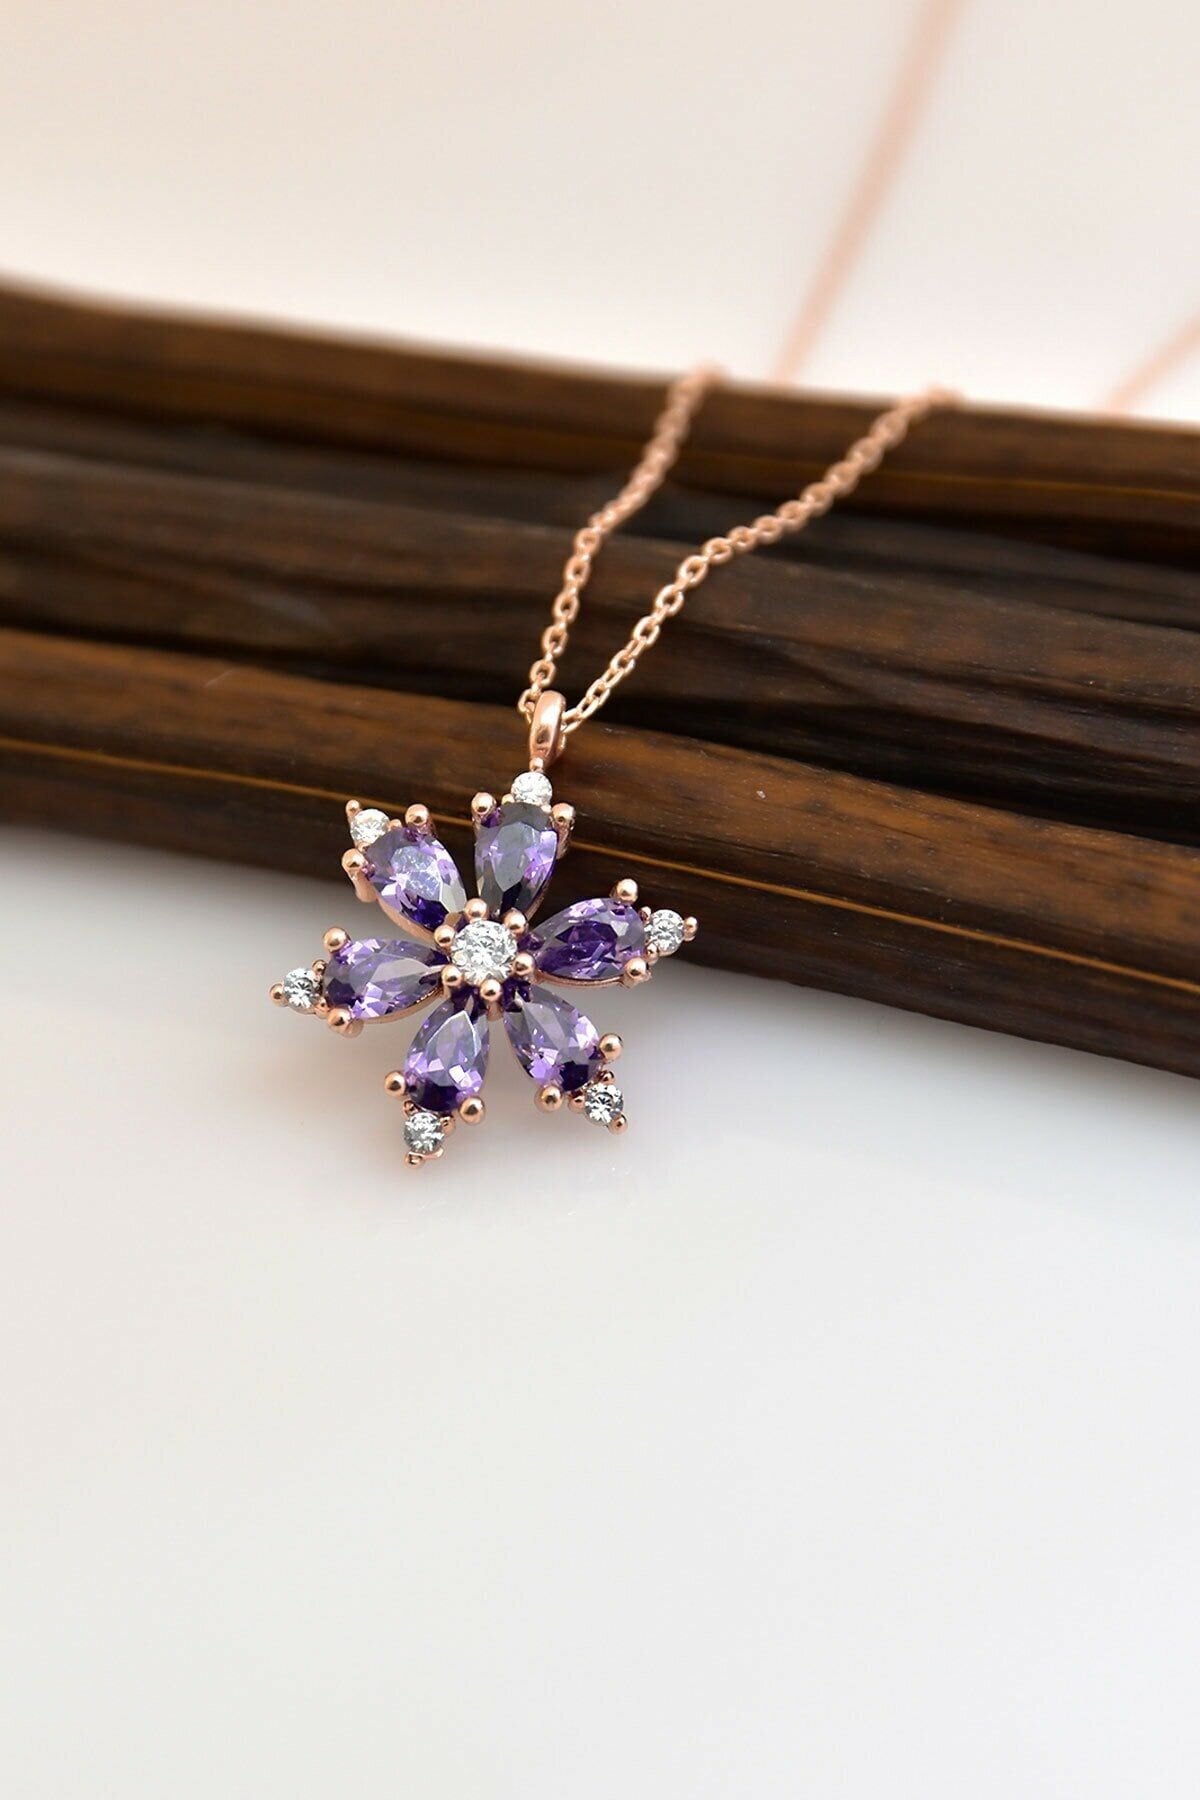 Get Royal Look with the best Amethyst Jewellery